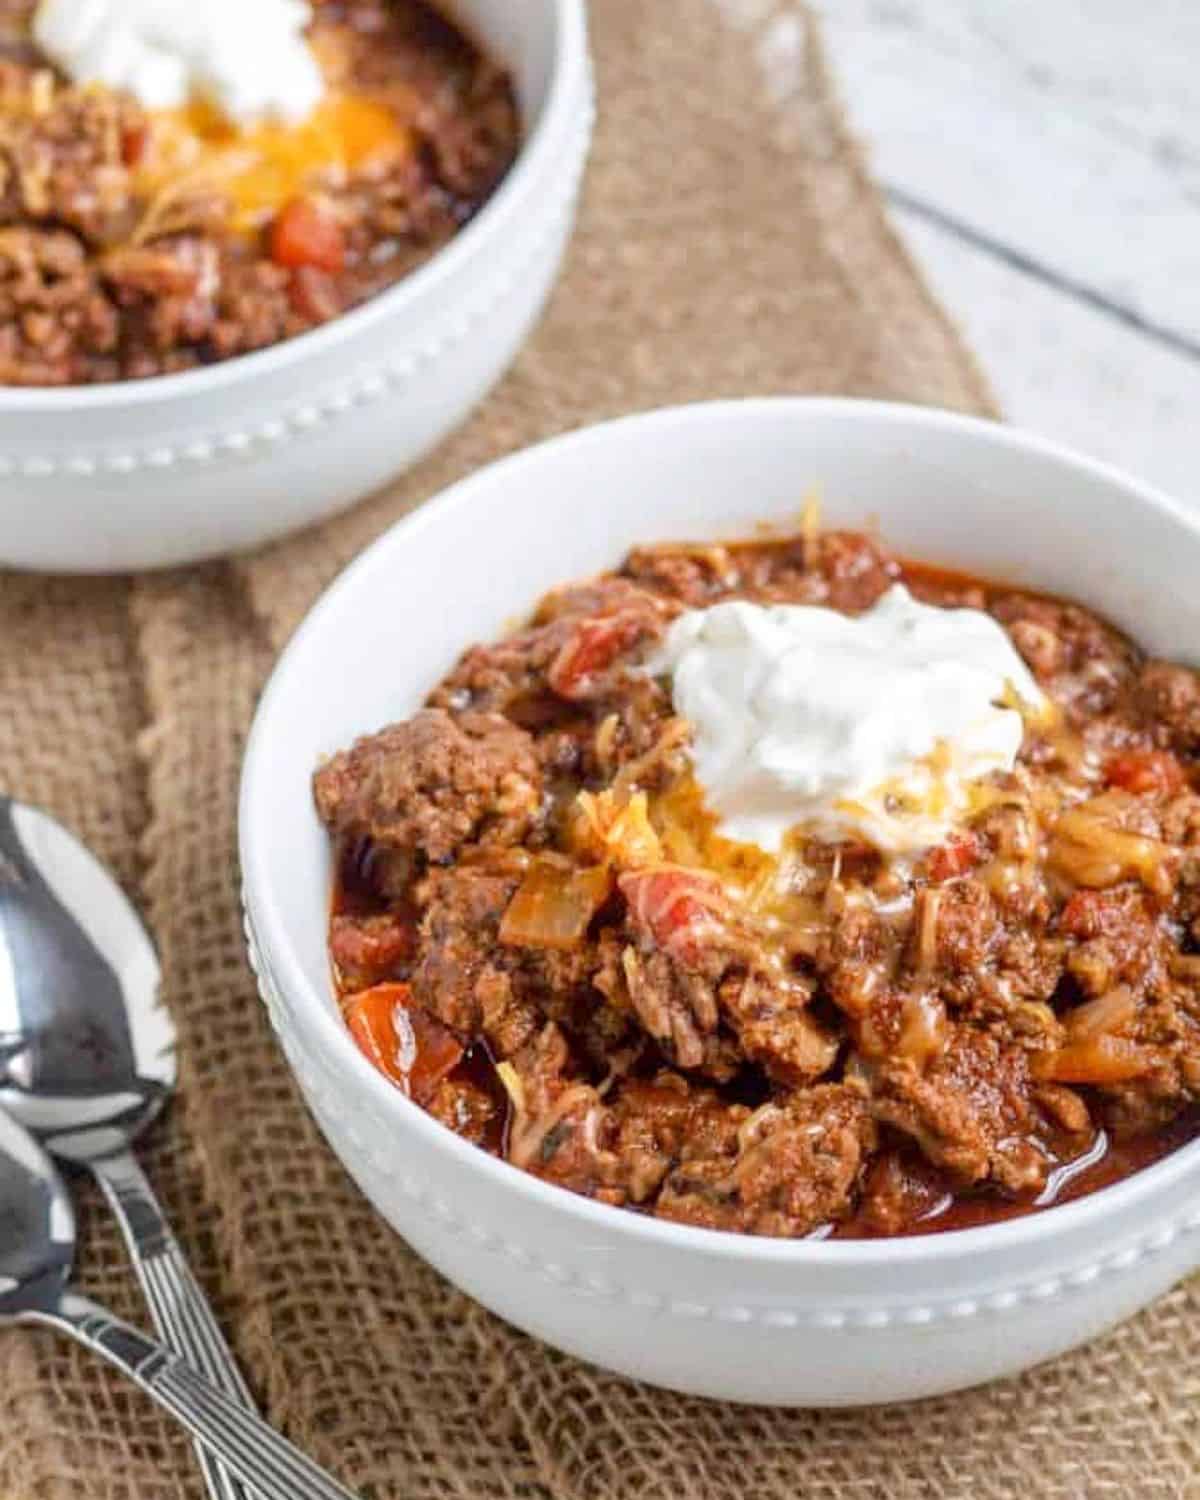 chili in a white bowl with sour cream and shredded cheese.